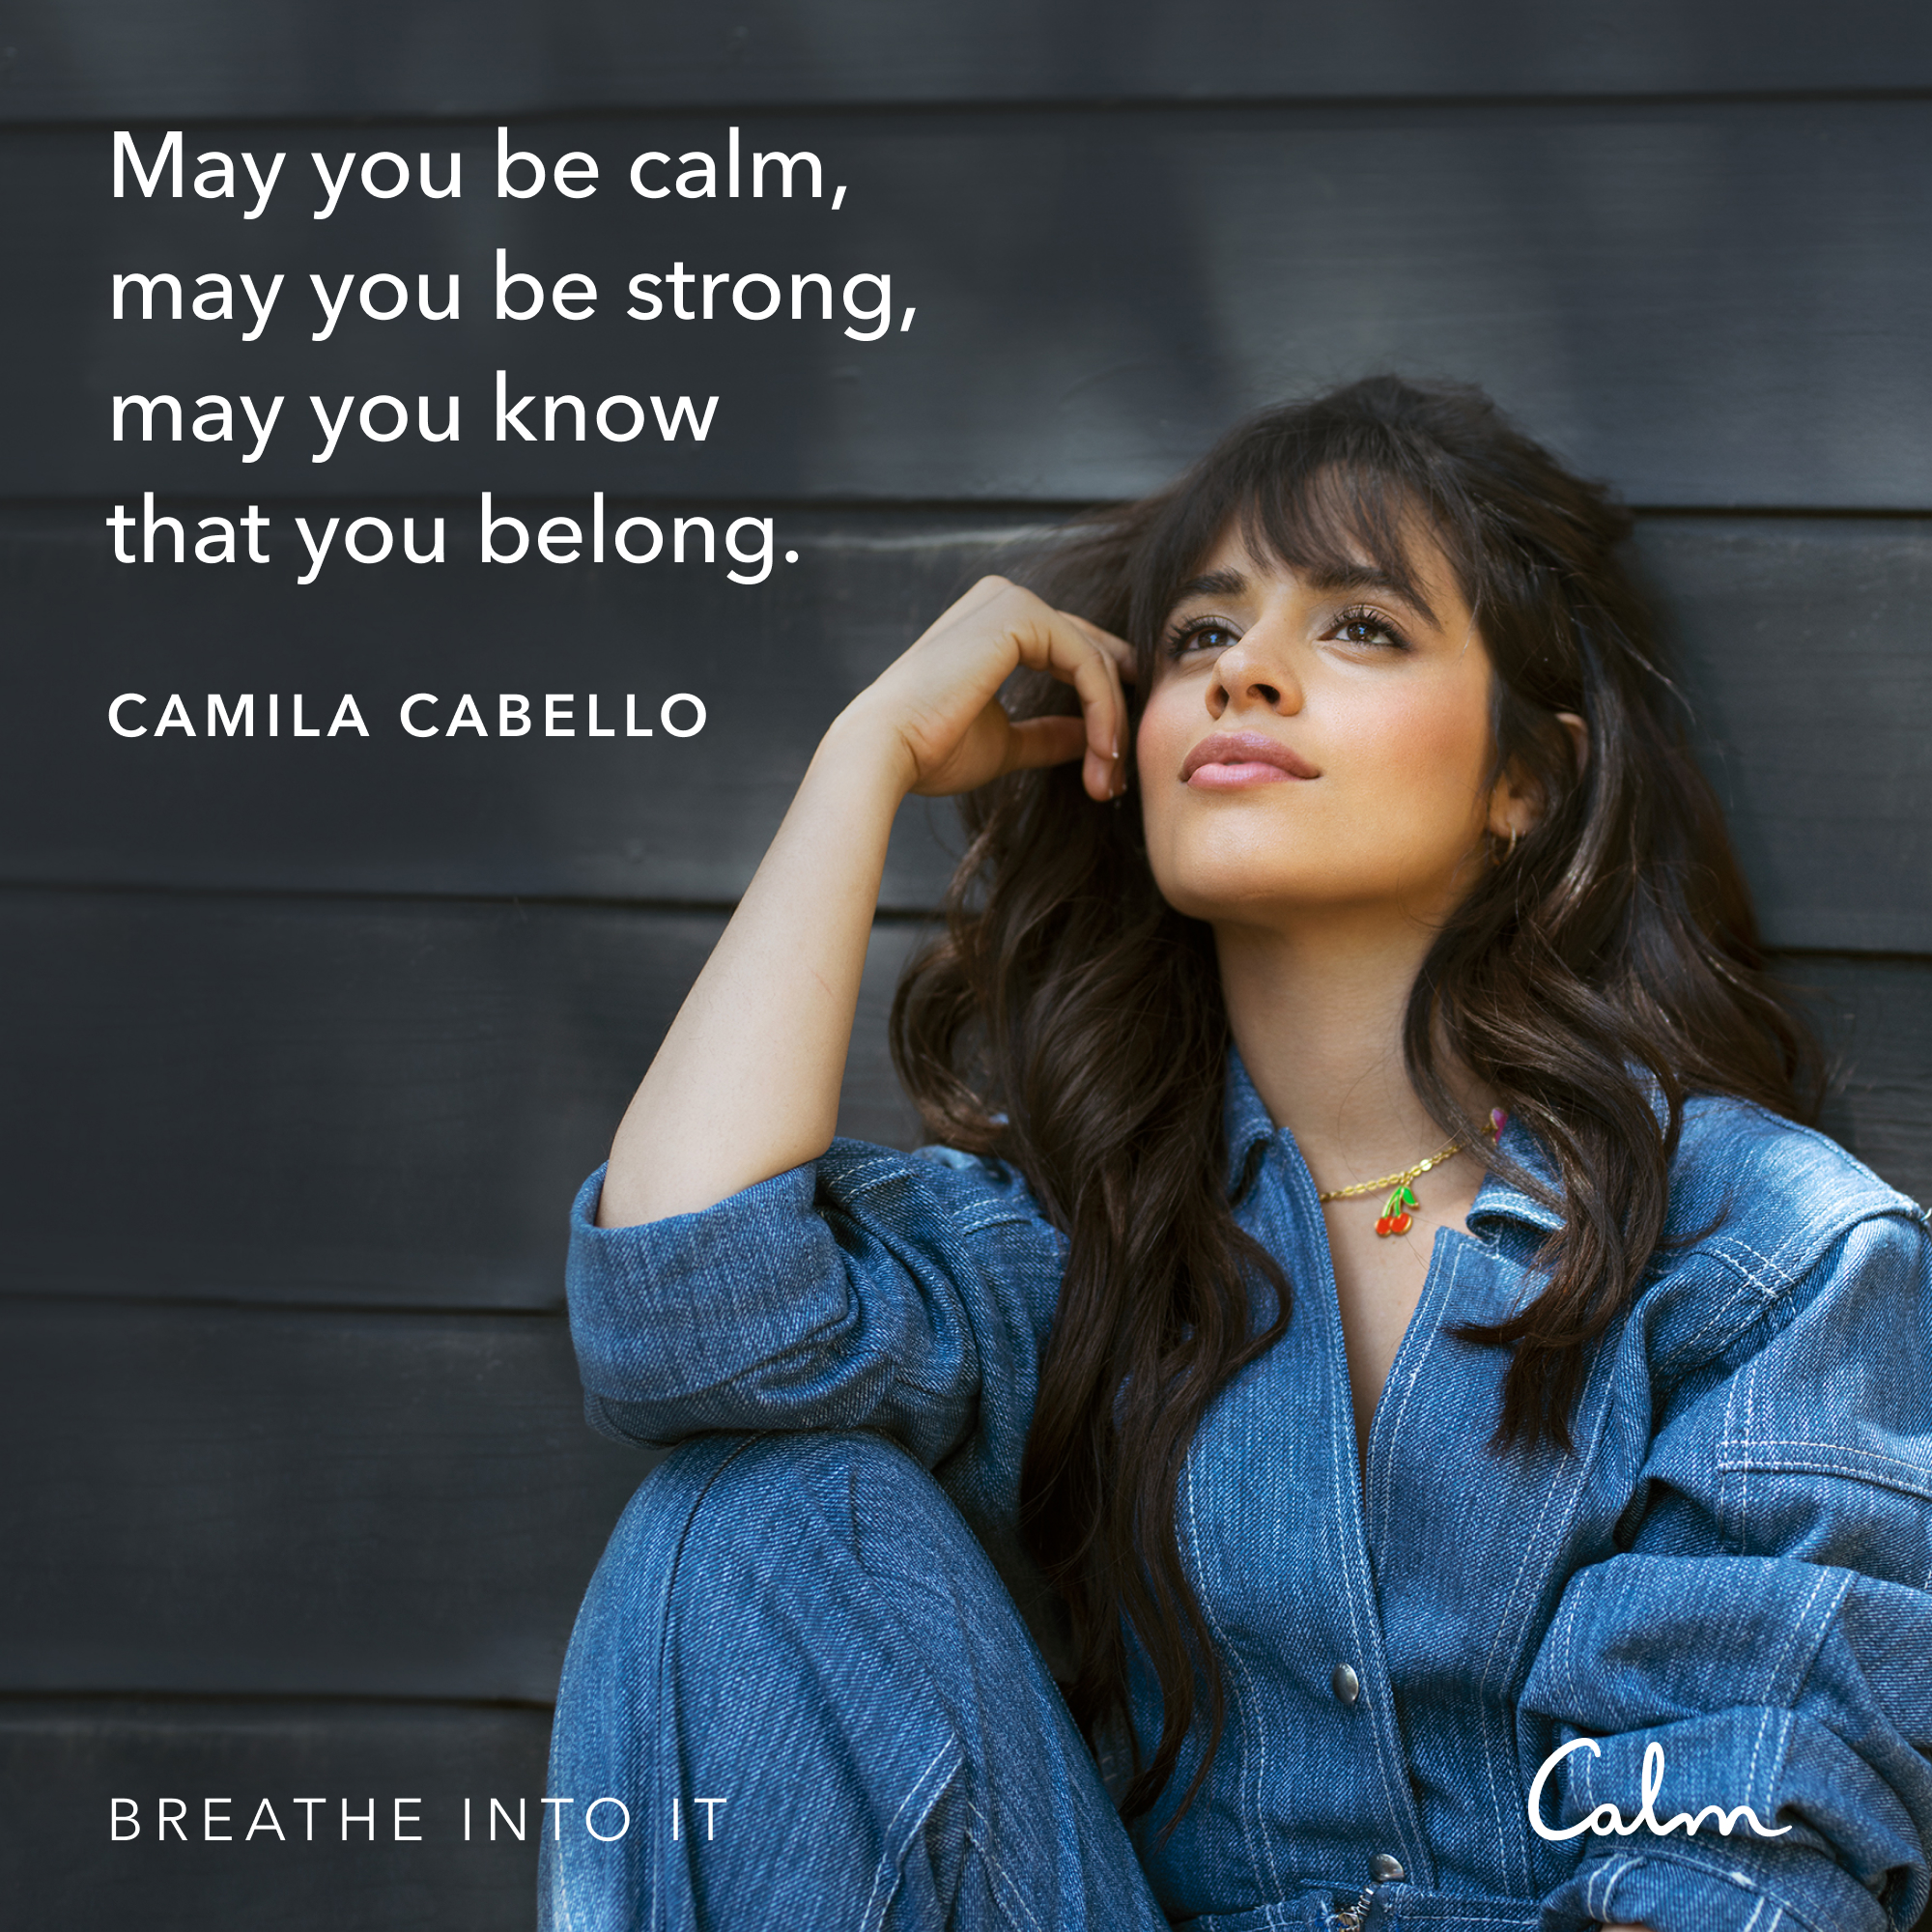 Camila Cabello's 'Breathe Into It Series' on Calm is now available